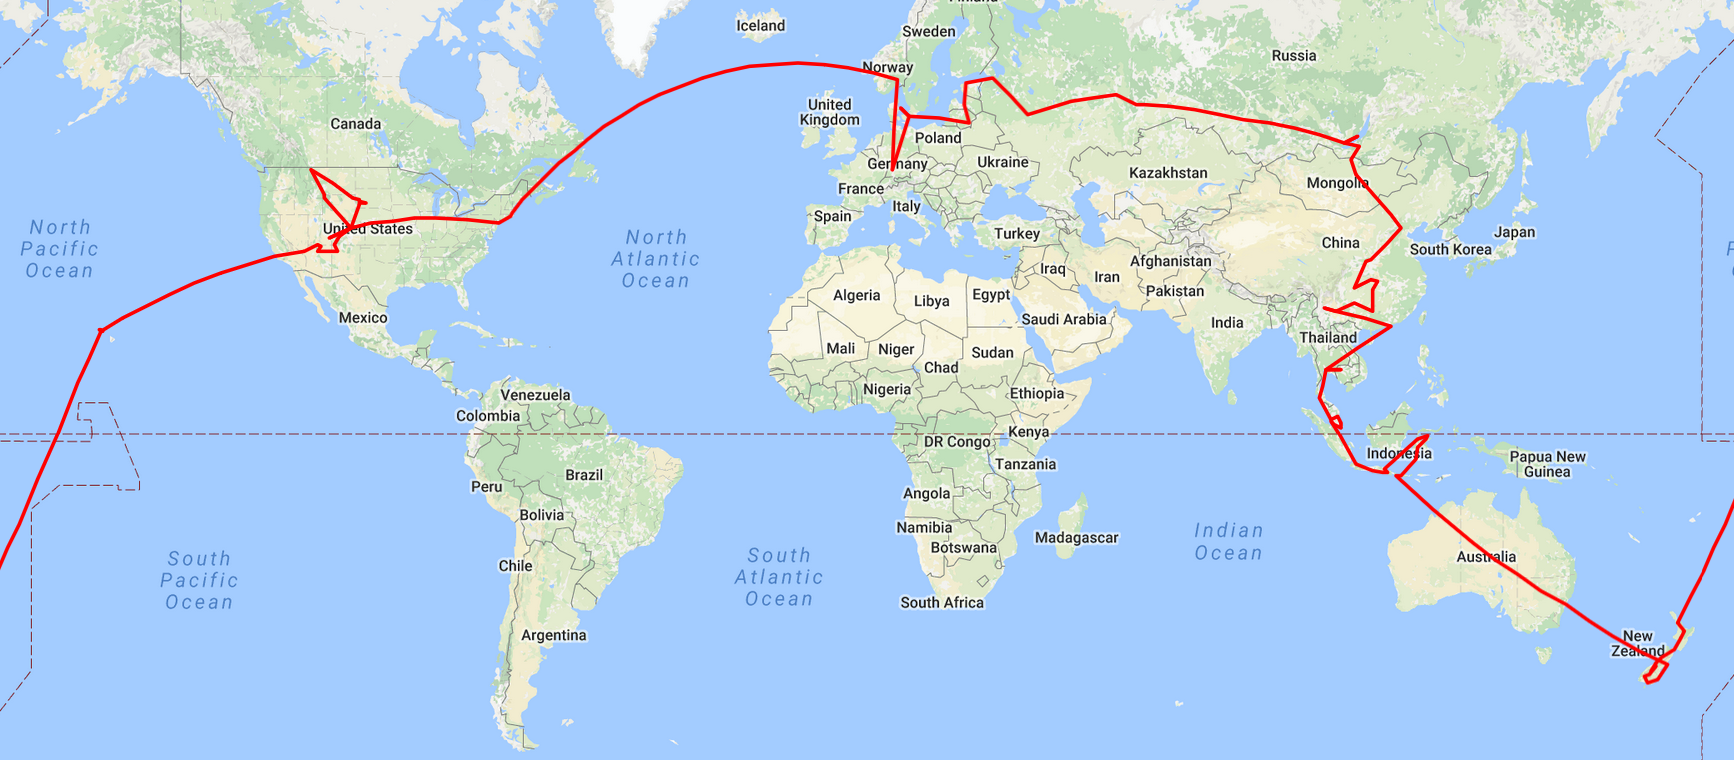 <p>Here I mapped my traveling route around the world. You can simply follow the read line and discover travelling stories along the way…</p>
